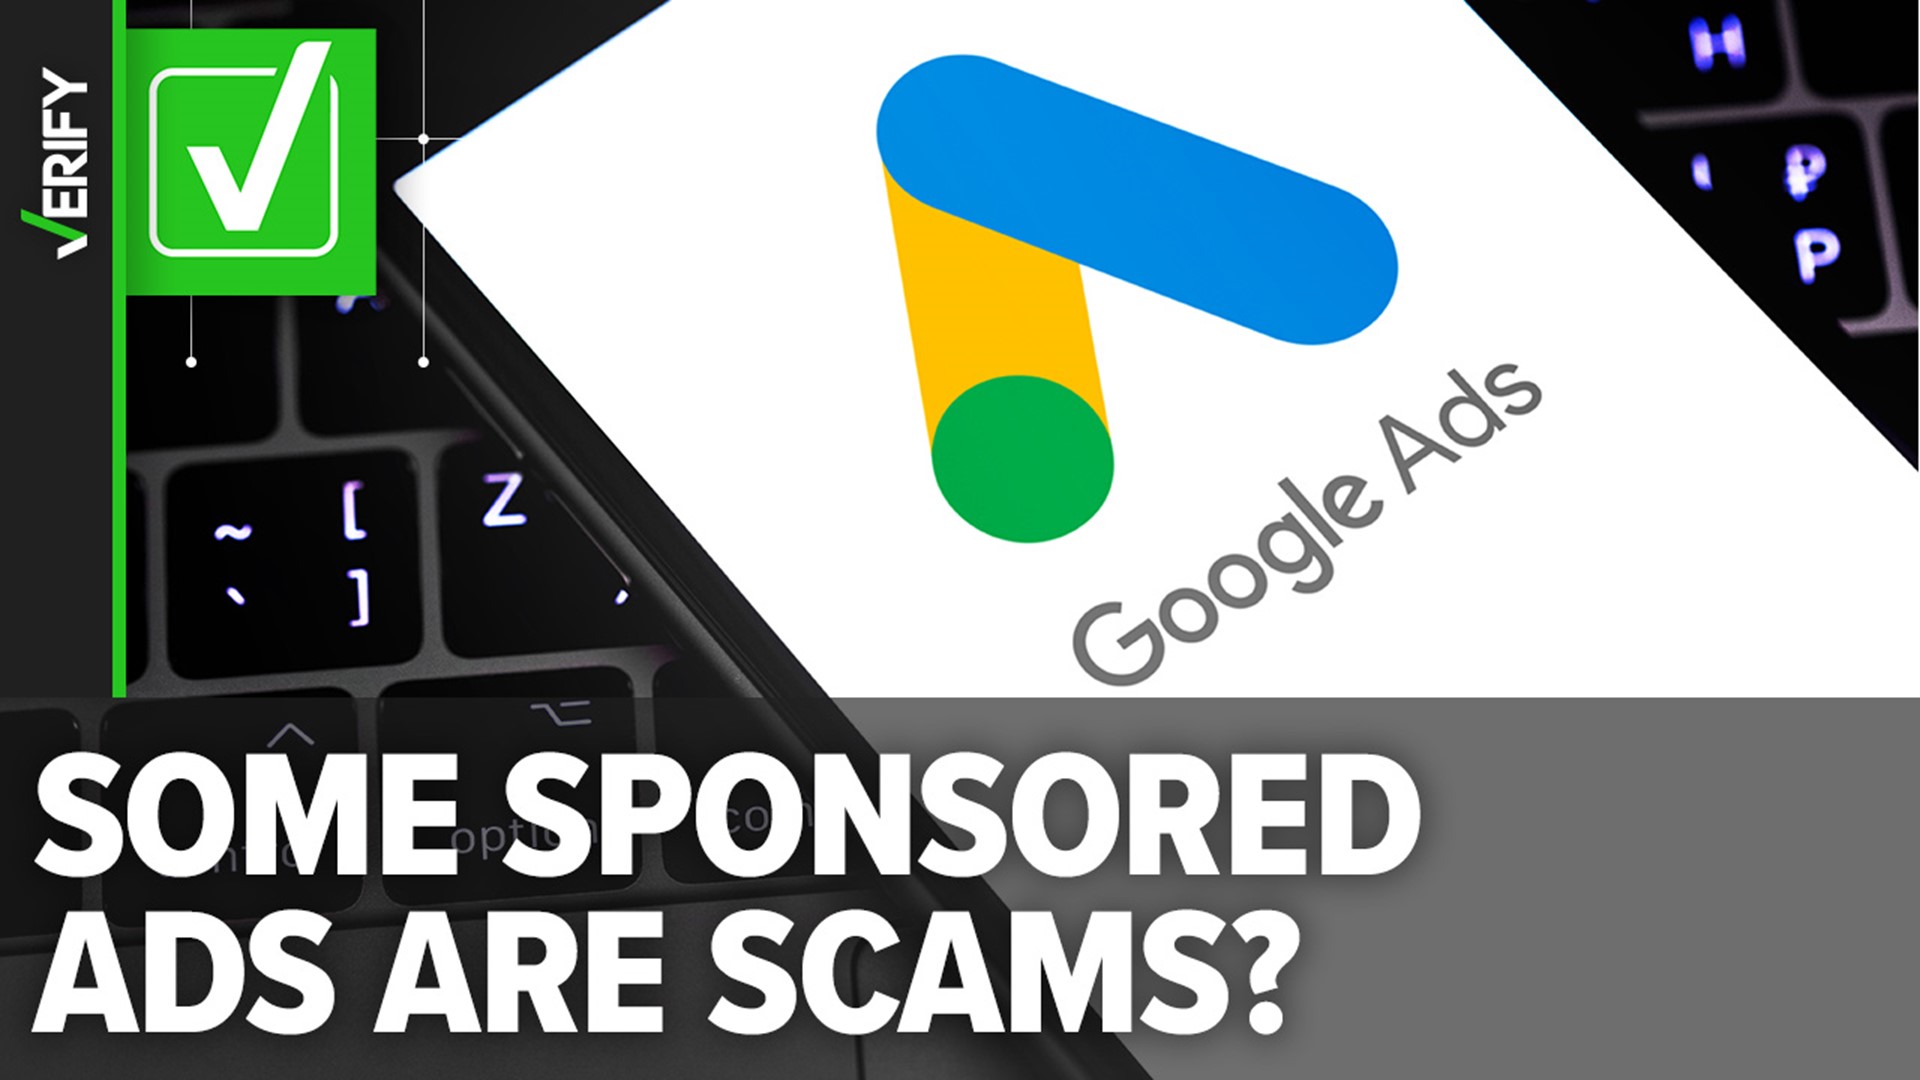 Scammers can disguise malicious links within ads at the top of Google search results, even though it violates the company’s rules. Here’s what to look out for.